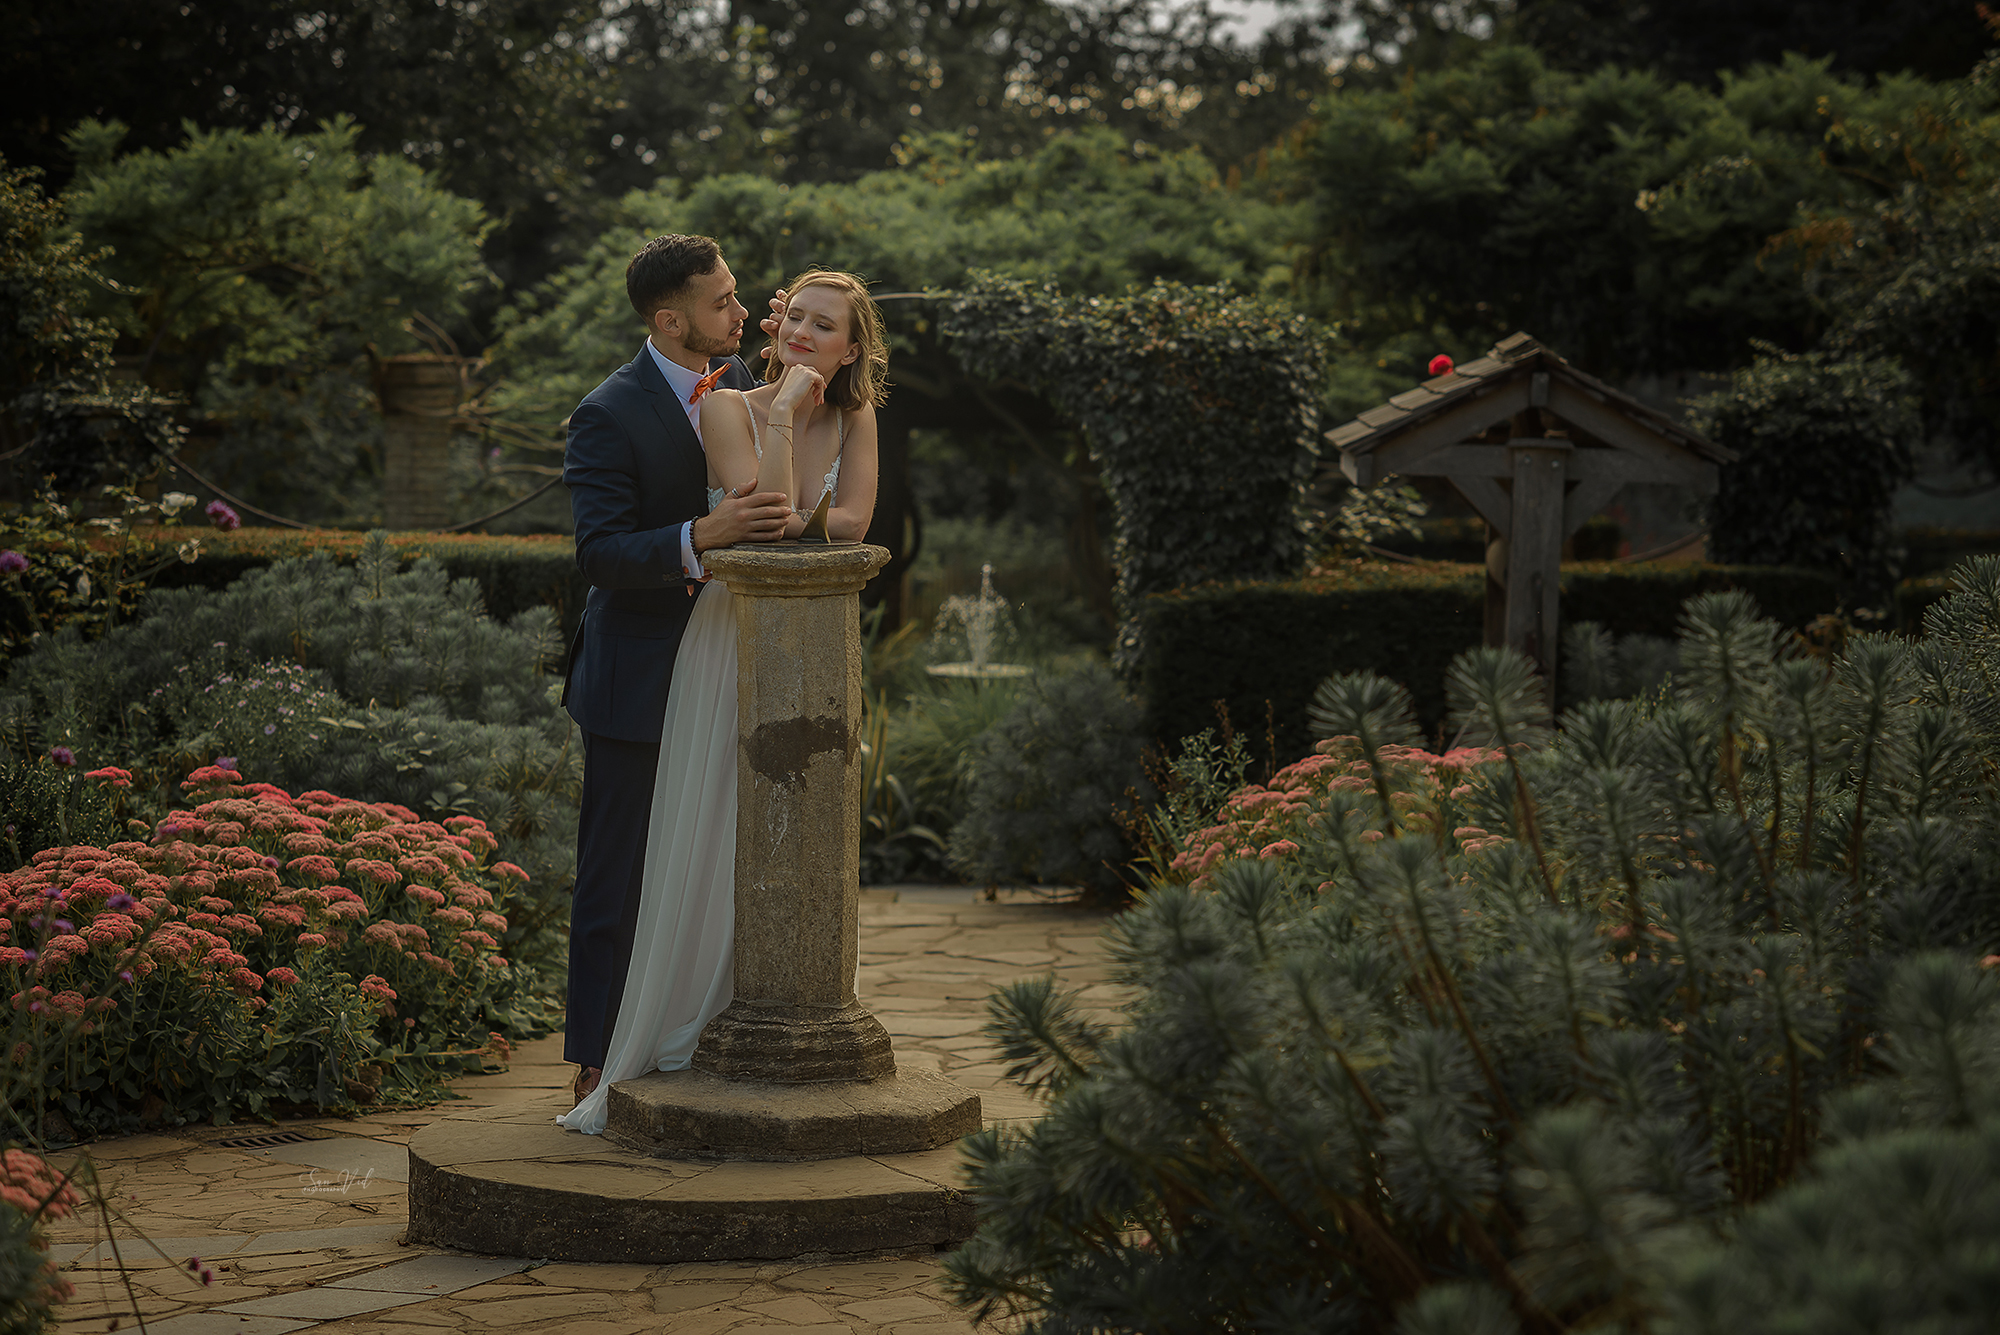 Creative Wedding Photography Bride and Groom The Rookery Park London